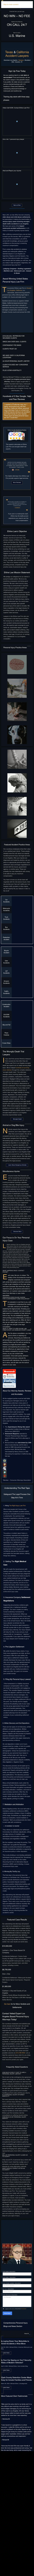 Ehline Law Firm Personal Injury Attorneys, APLC - Long Beach CA Lawyers